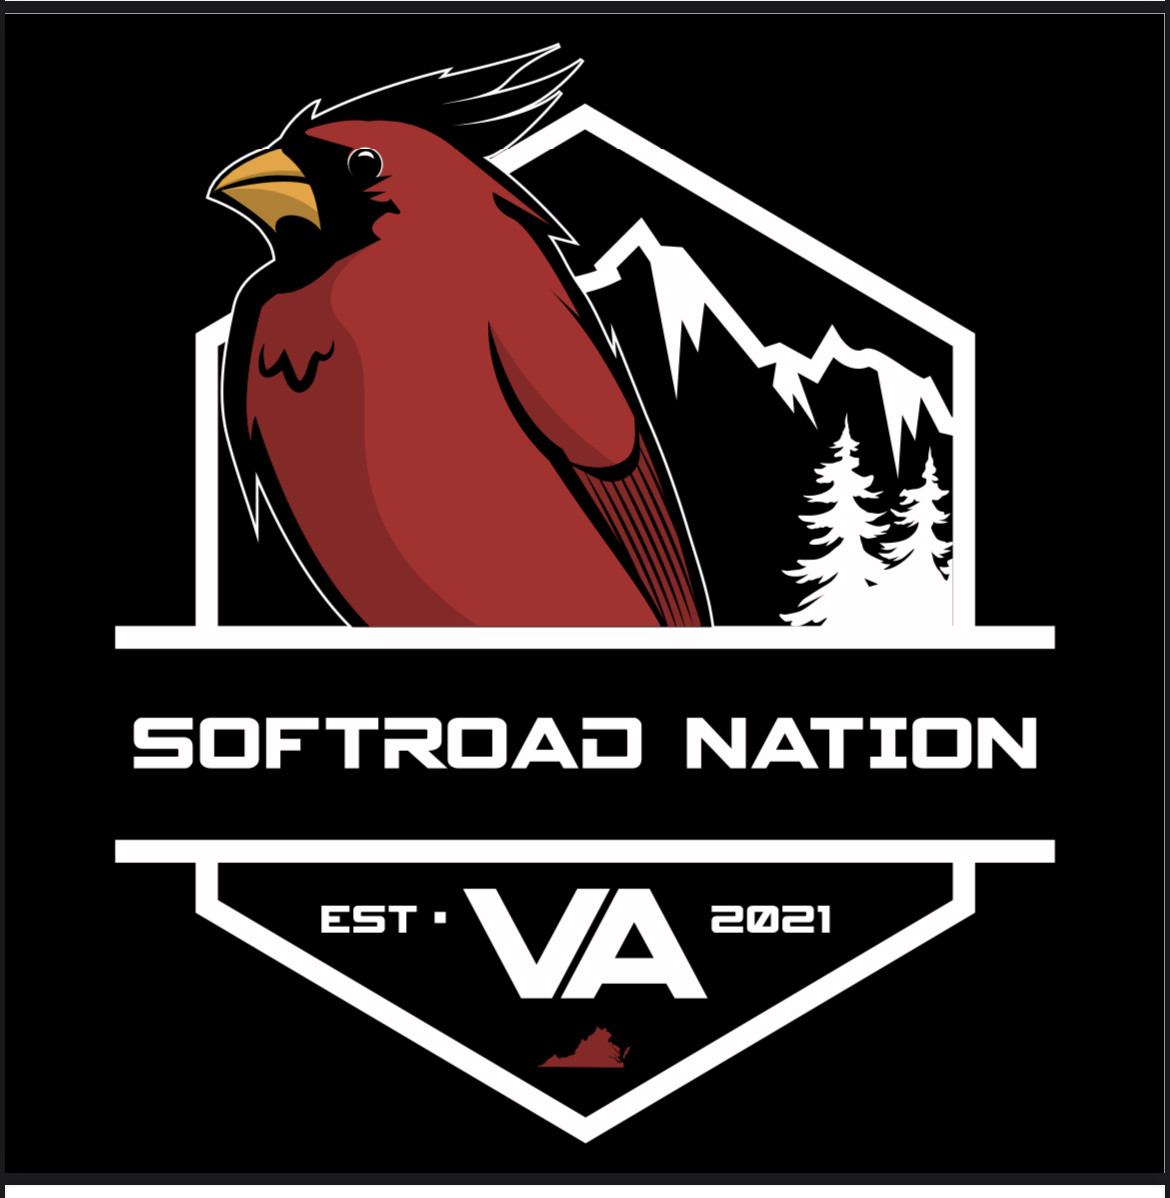 Softroad Nation of Virginia